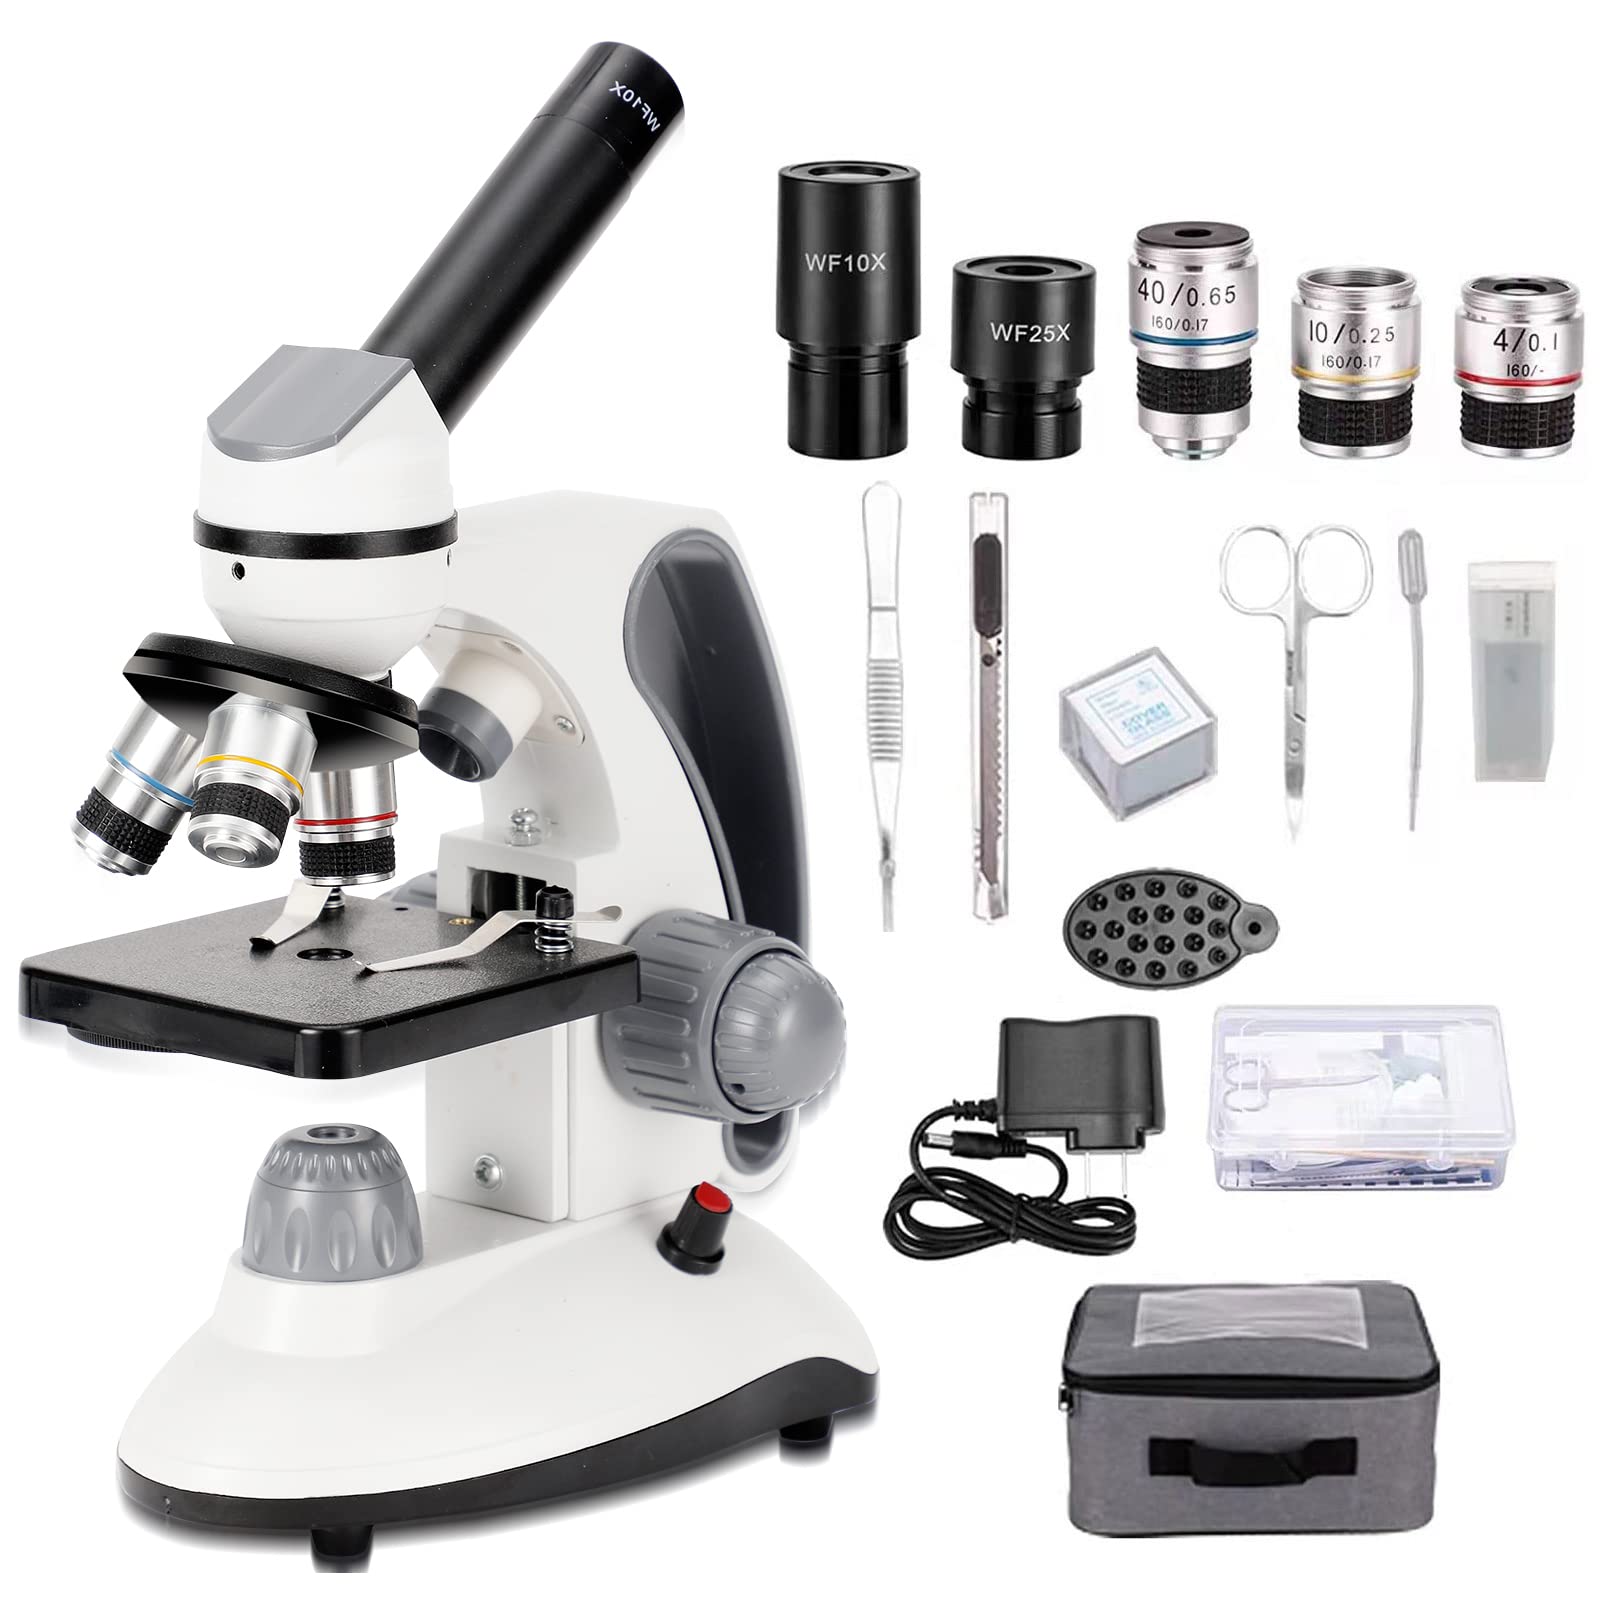  Microscope For Adults Kids Students 100-2000x Magnification  Powerful Biological Educational Microscopes